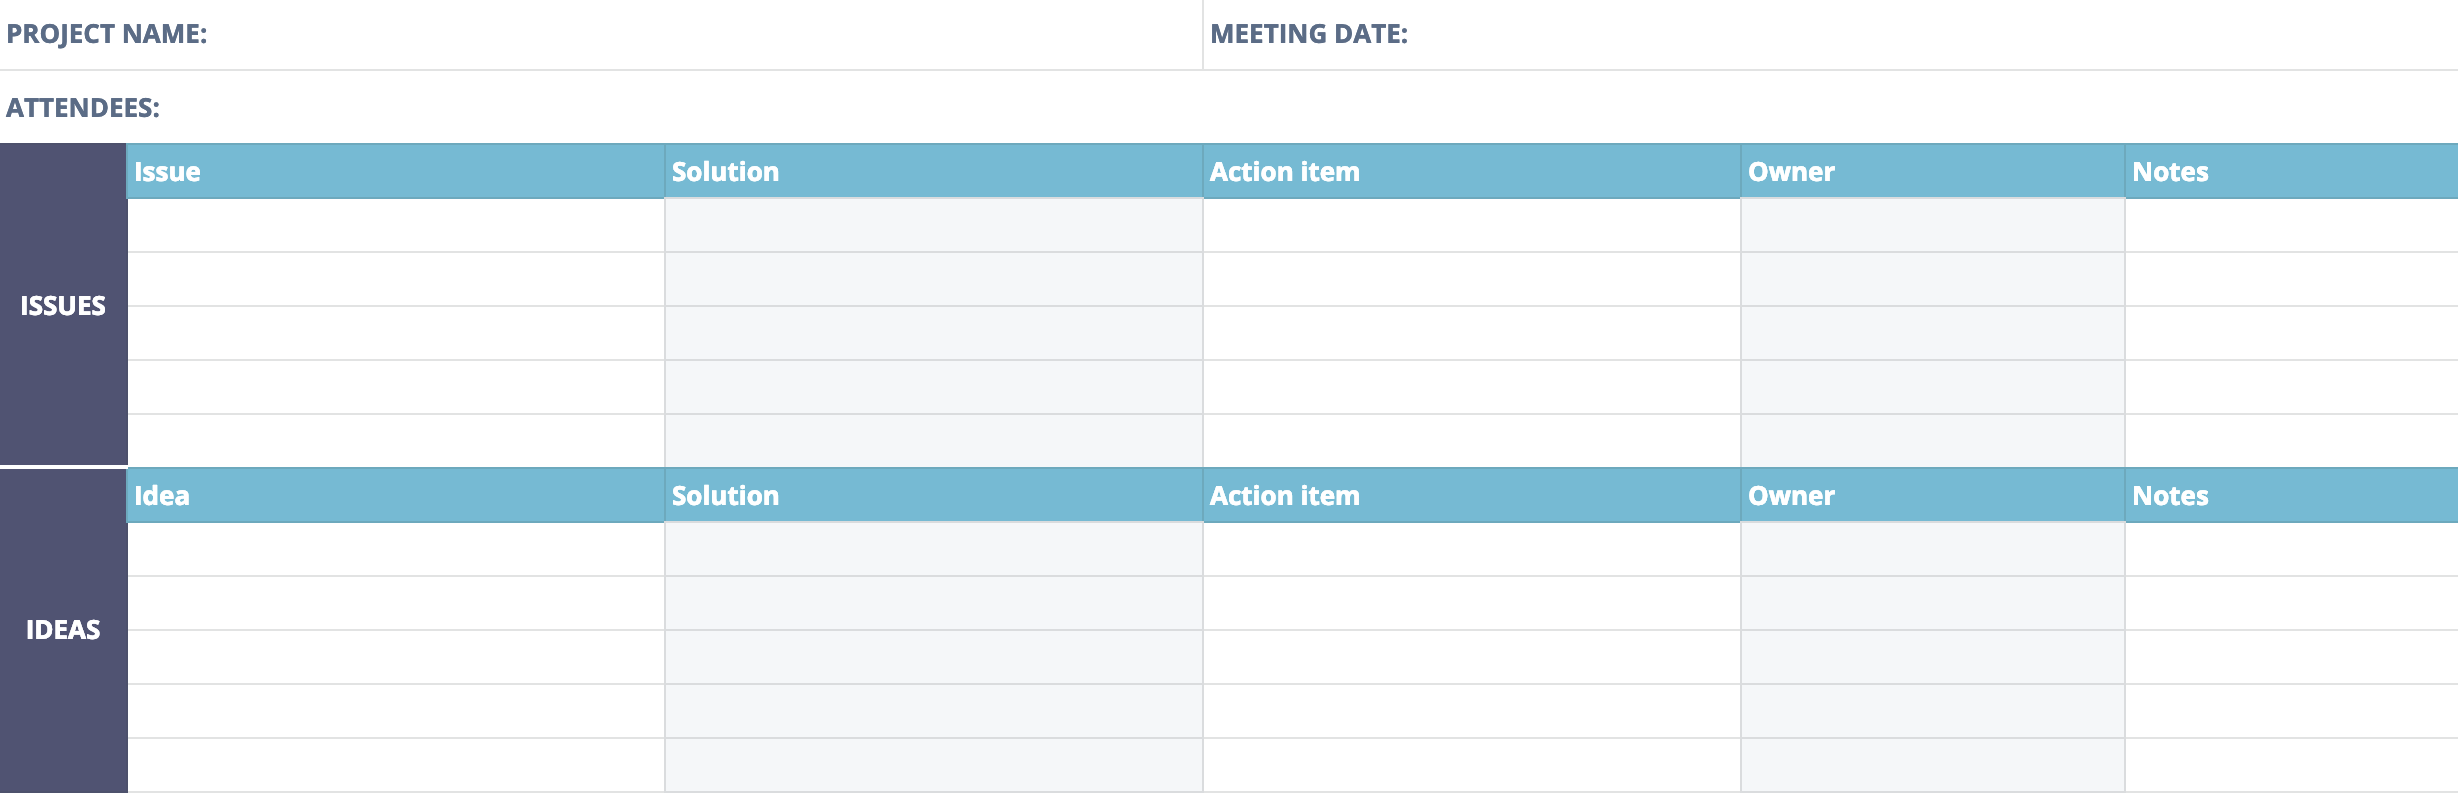 Post-Mortem Meeting & Report Template  TeamGantt In Post Project Report Template